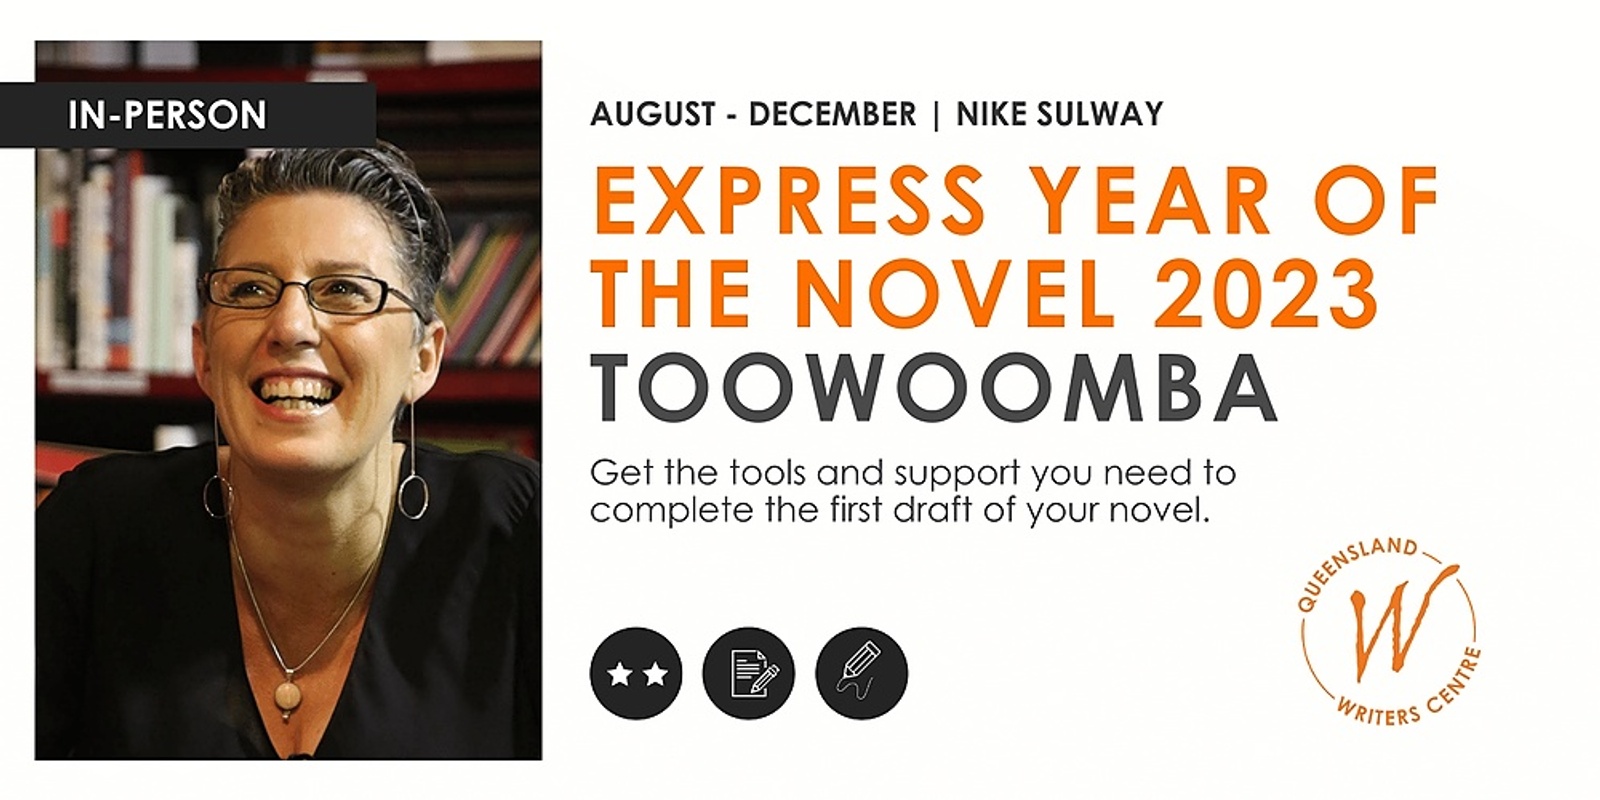 Express Year Of The Novel 2023 with Nike Sulway (Toowoomba)